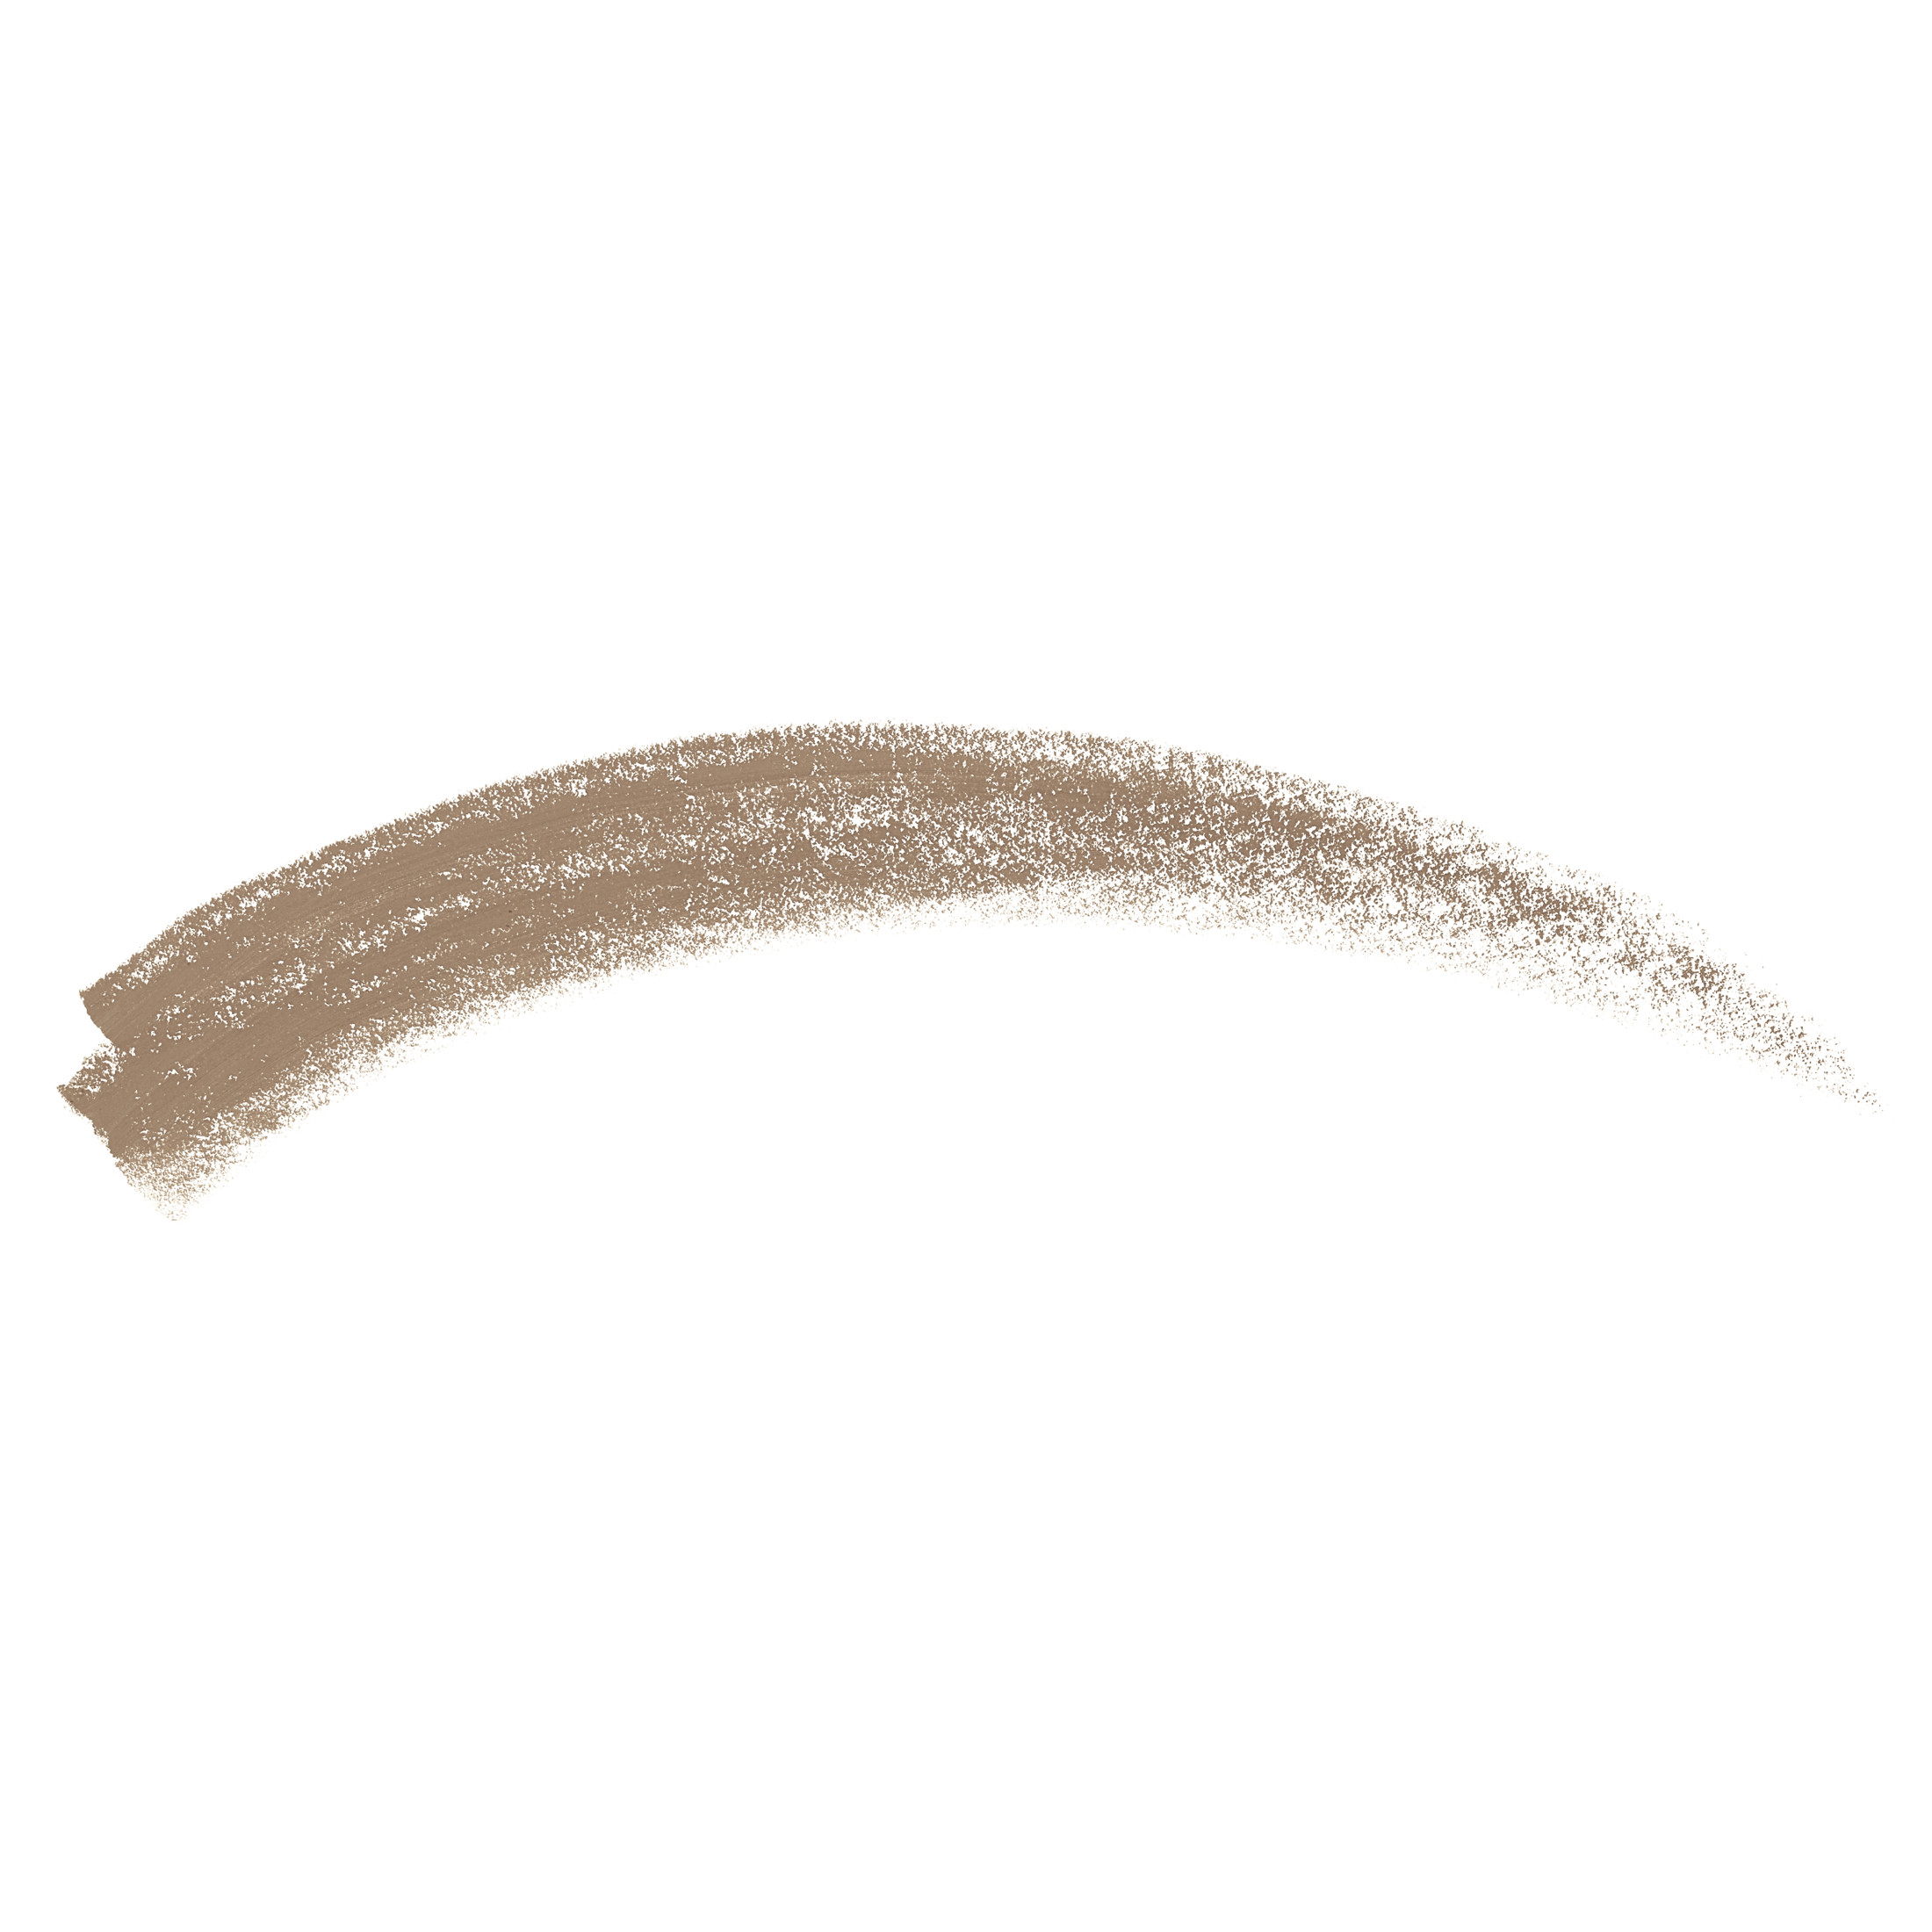 Rimmel London Brow This Way Fill & Sculpt Eyebrow Definer, Blonde, 0.01 oz - image 2 of 7